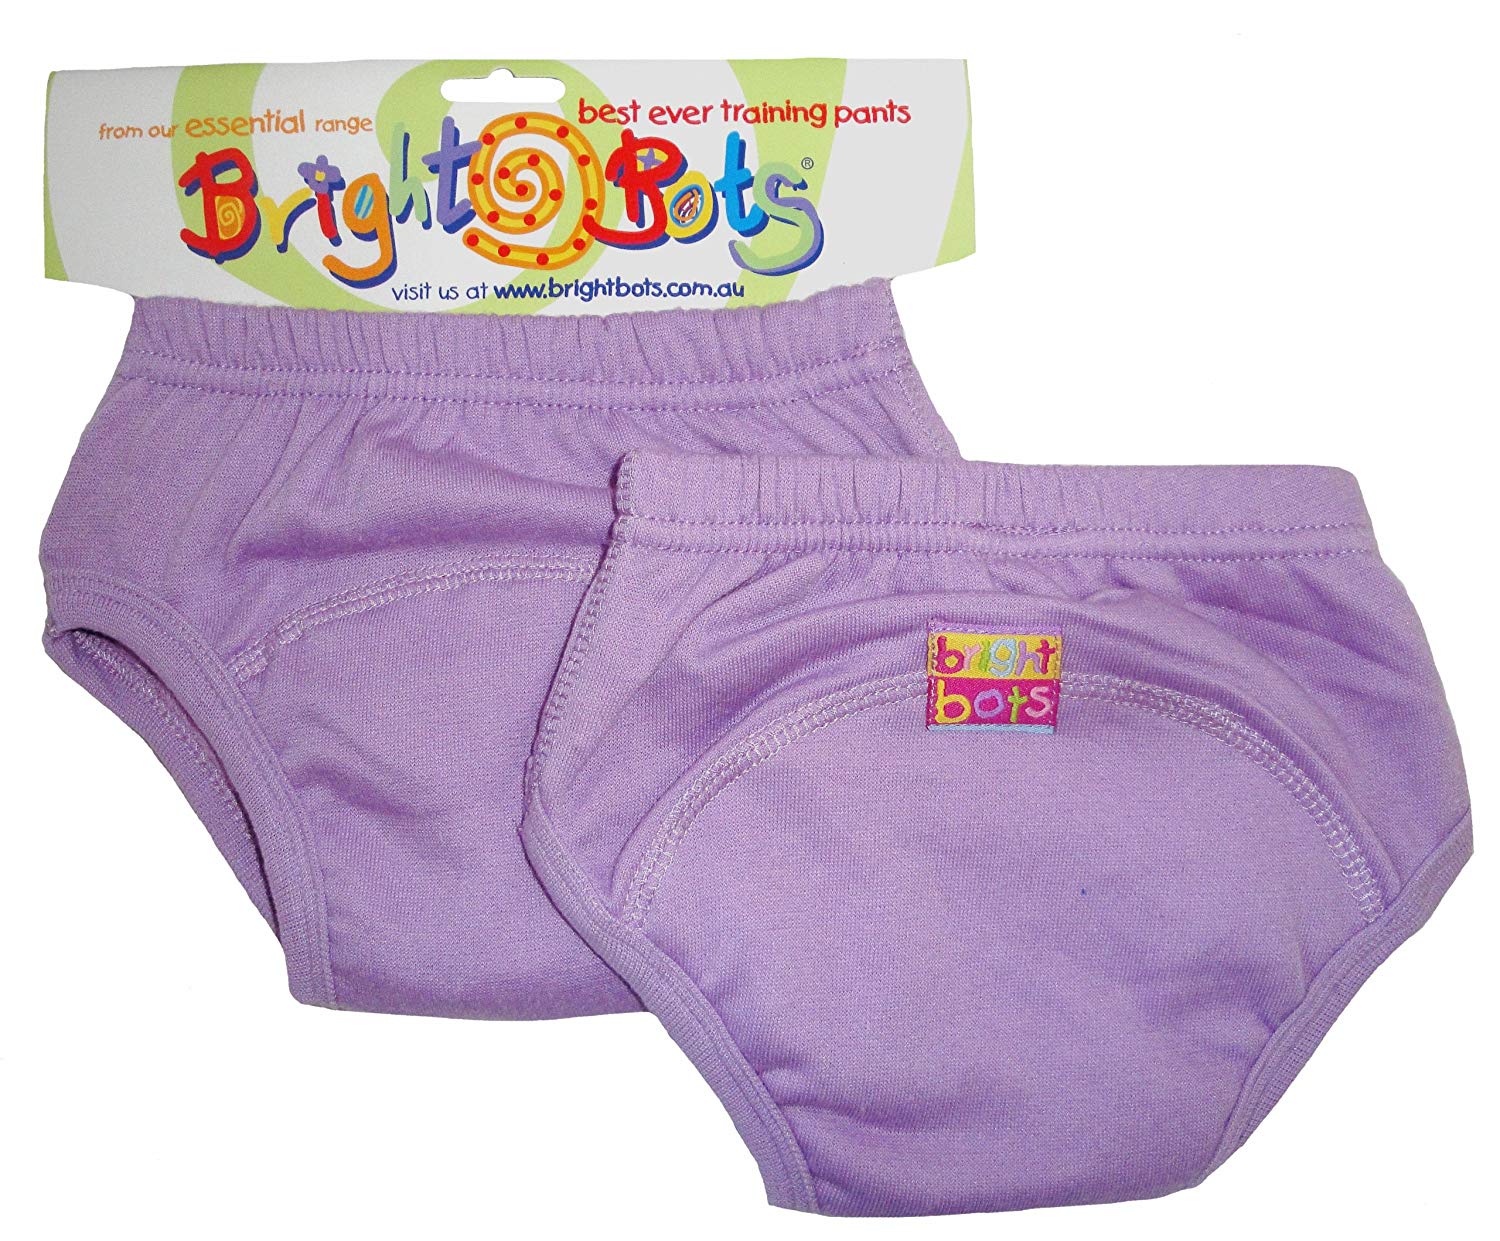 Extra Larg Bright Bots Potty Training Pants Twin Pack 30-36 months Blue 